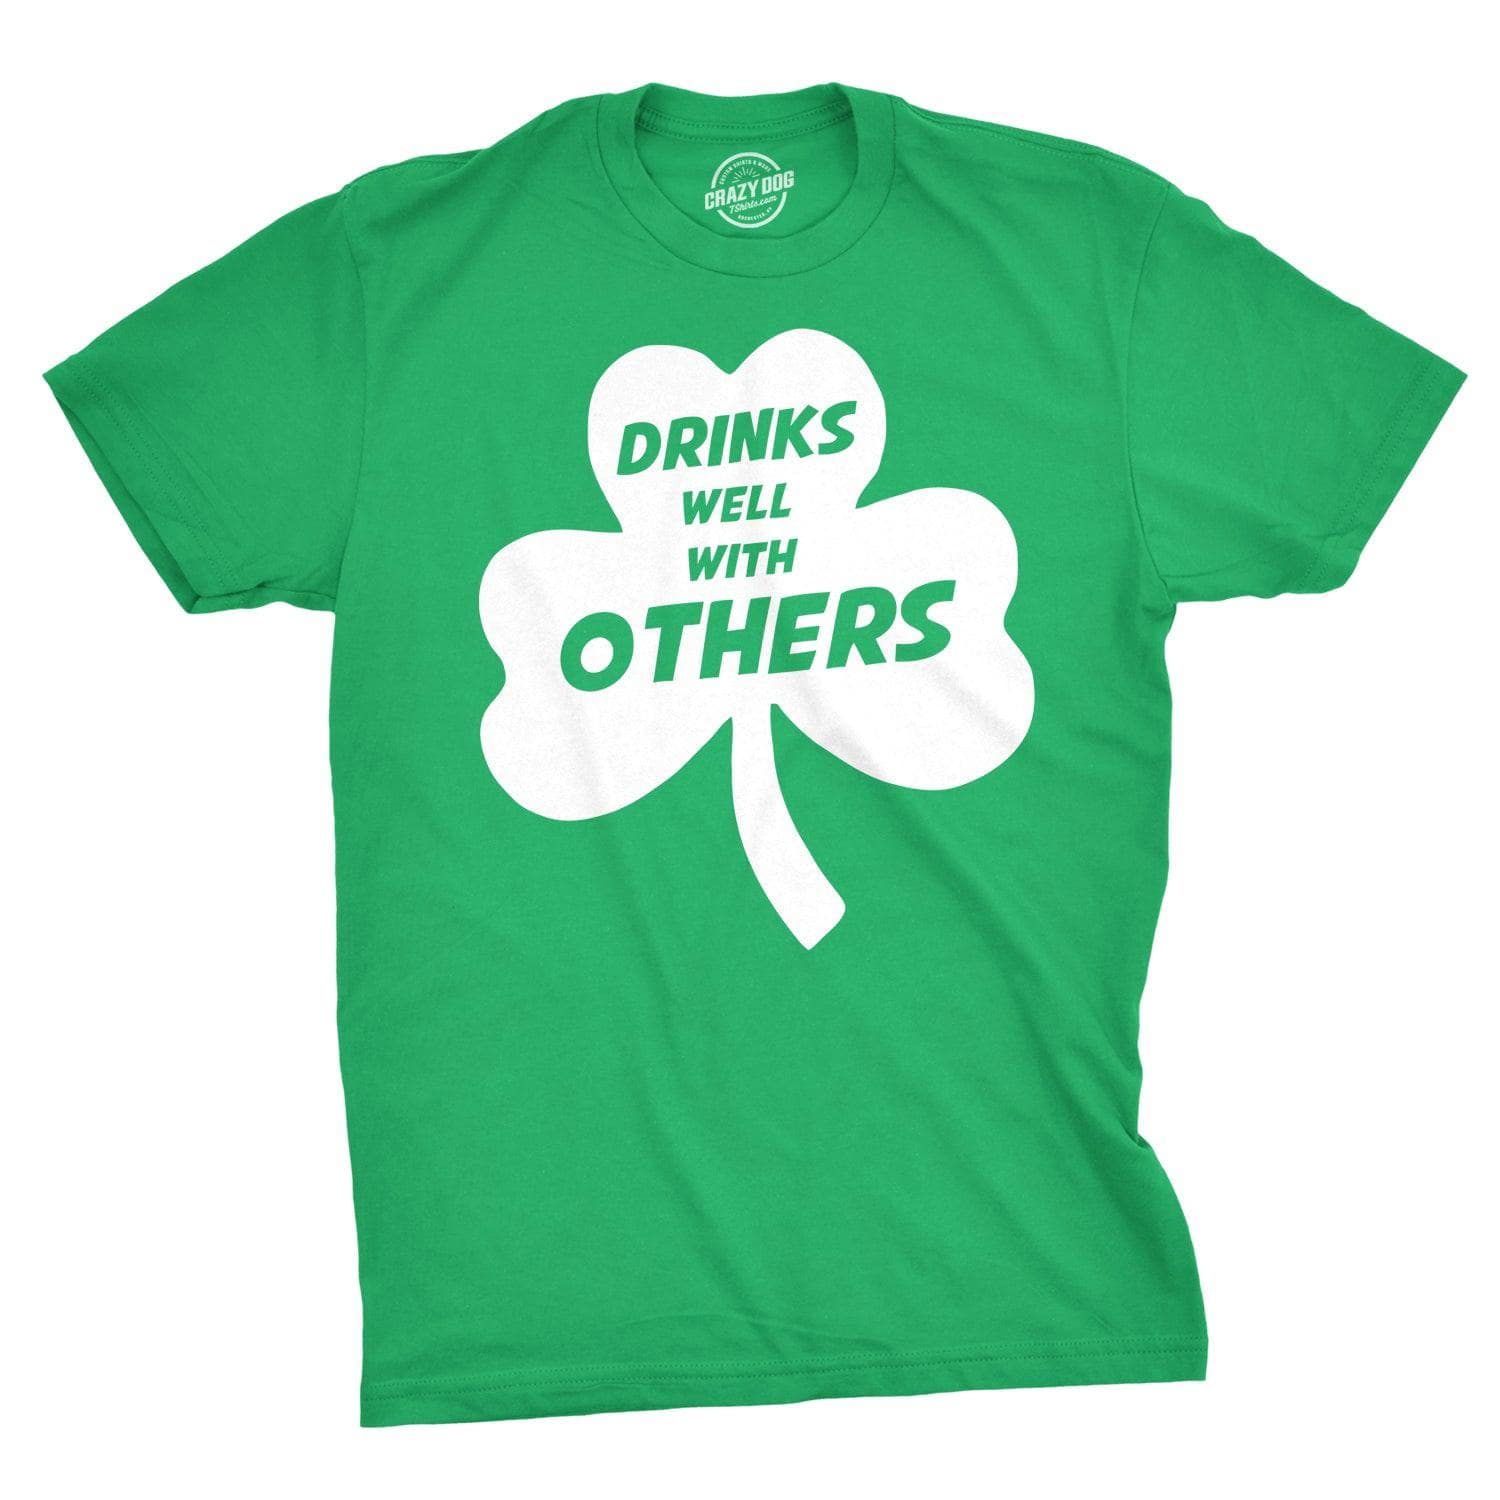  St. Patrick's Day Irish Green Men's T-Shirt | Culture Festival  Parade March 17 Funny Sarcastic Novelty Team Group Tees : Clothing, Shoes 